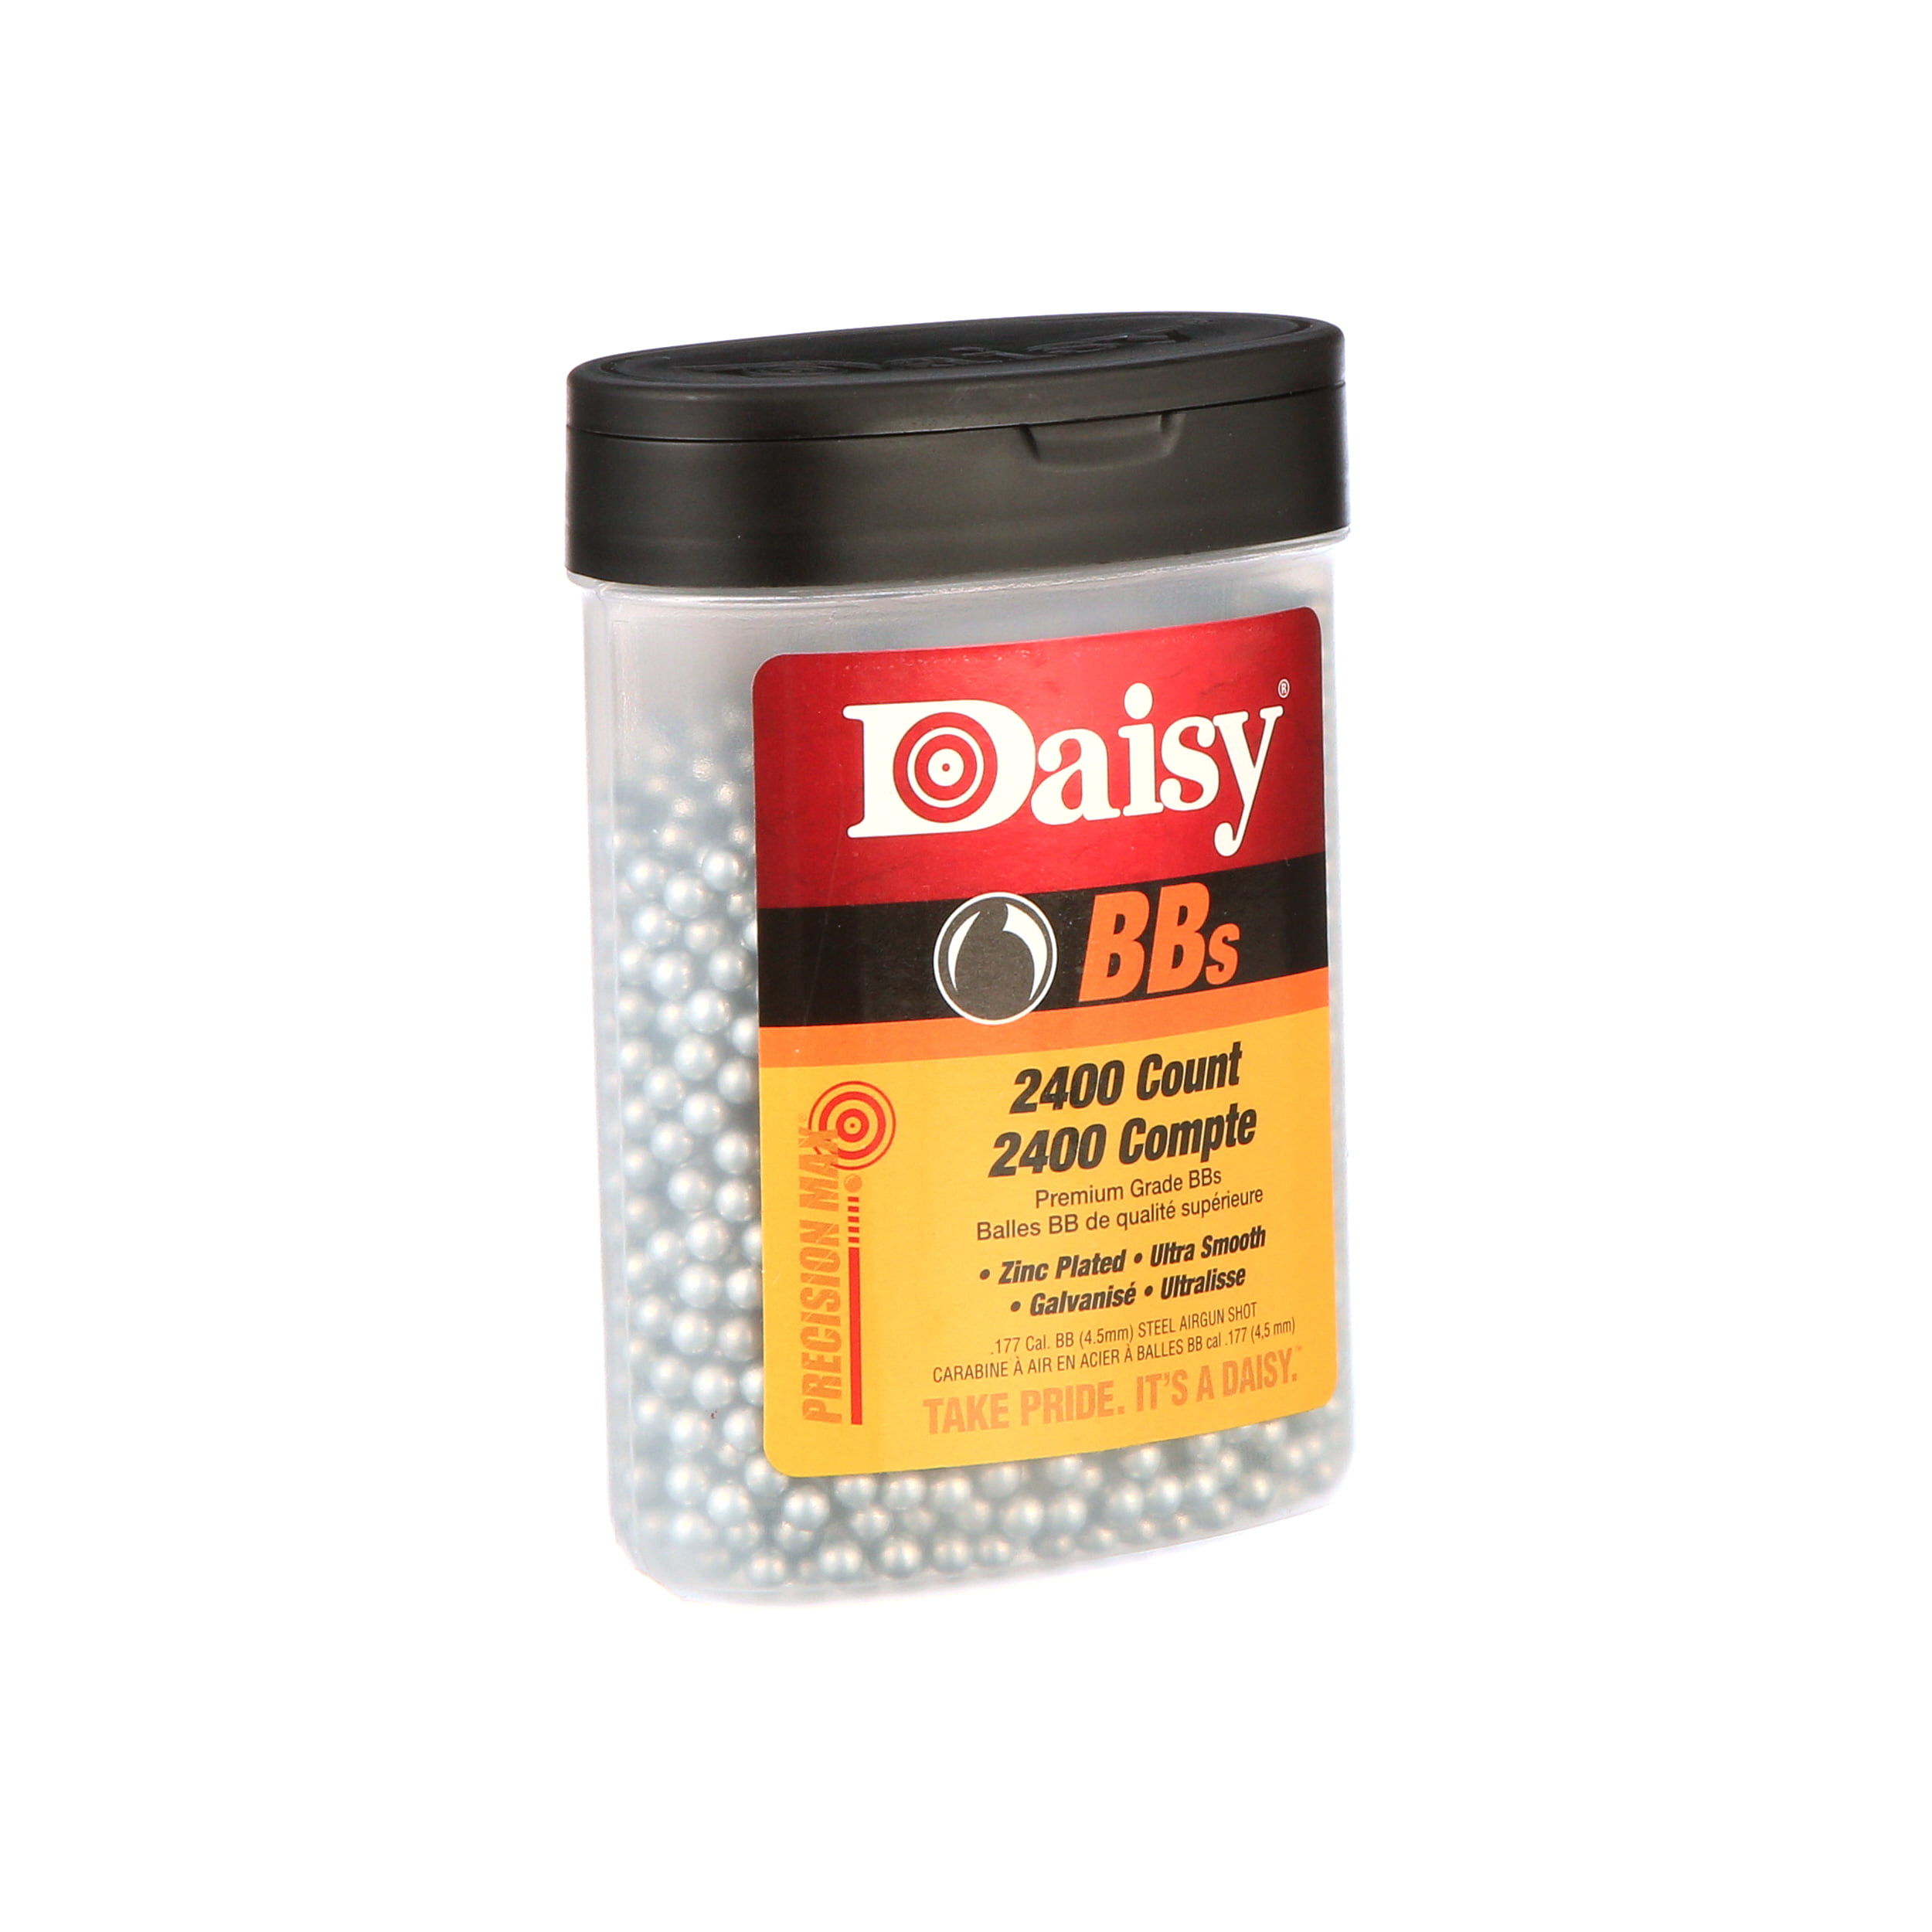 Daisy BBS Zinc Plated Steel Bb's Premium 177 Cal Flip Top 2400 Count 2pck for sale online 